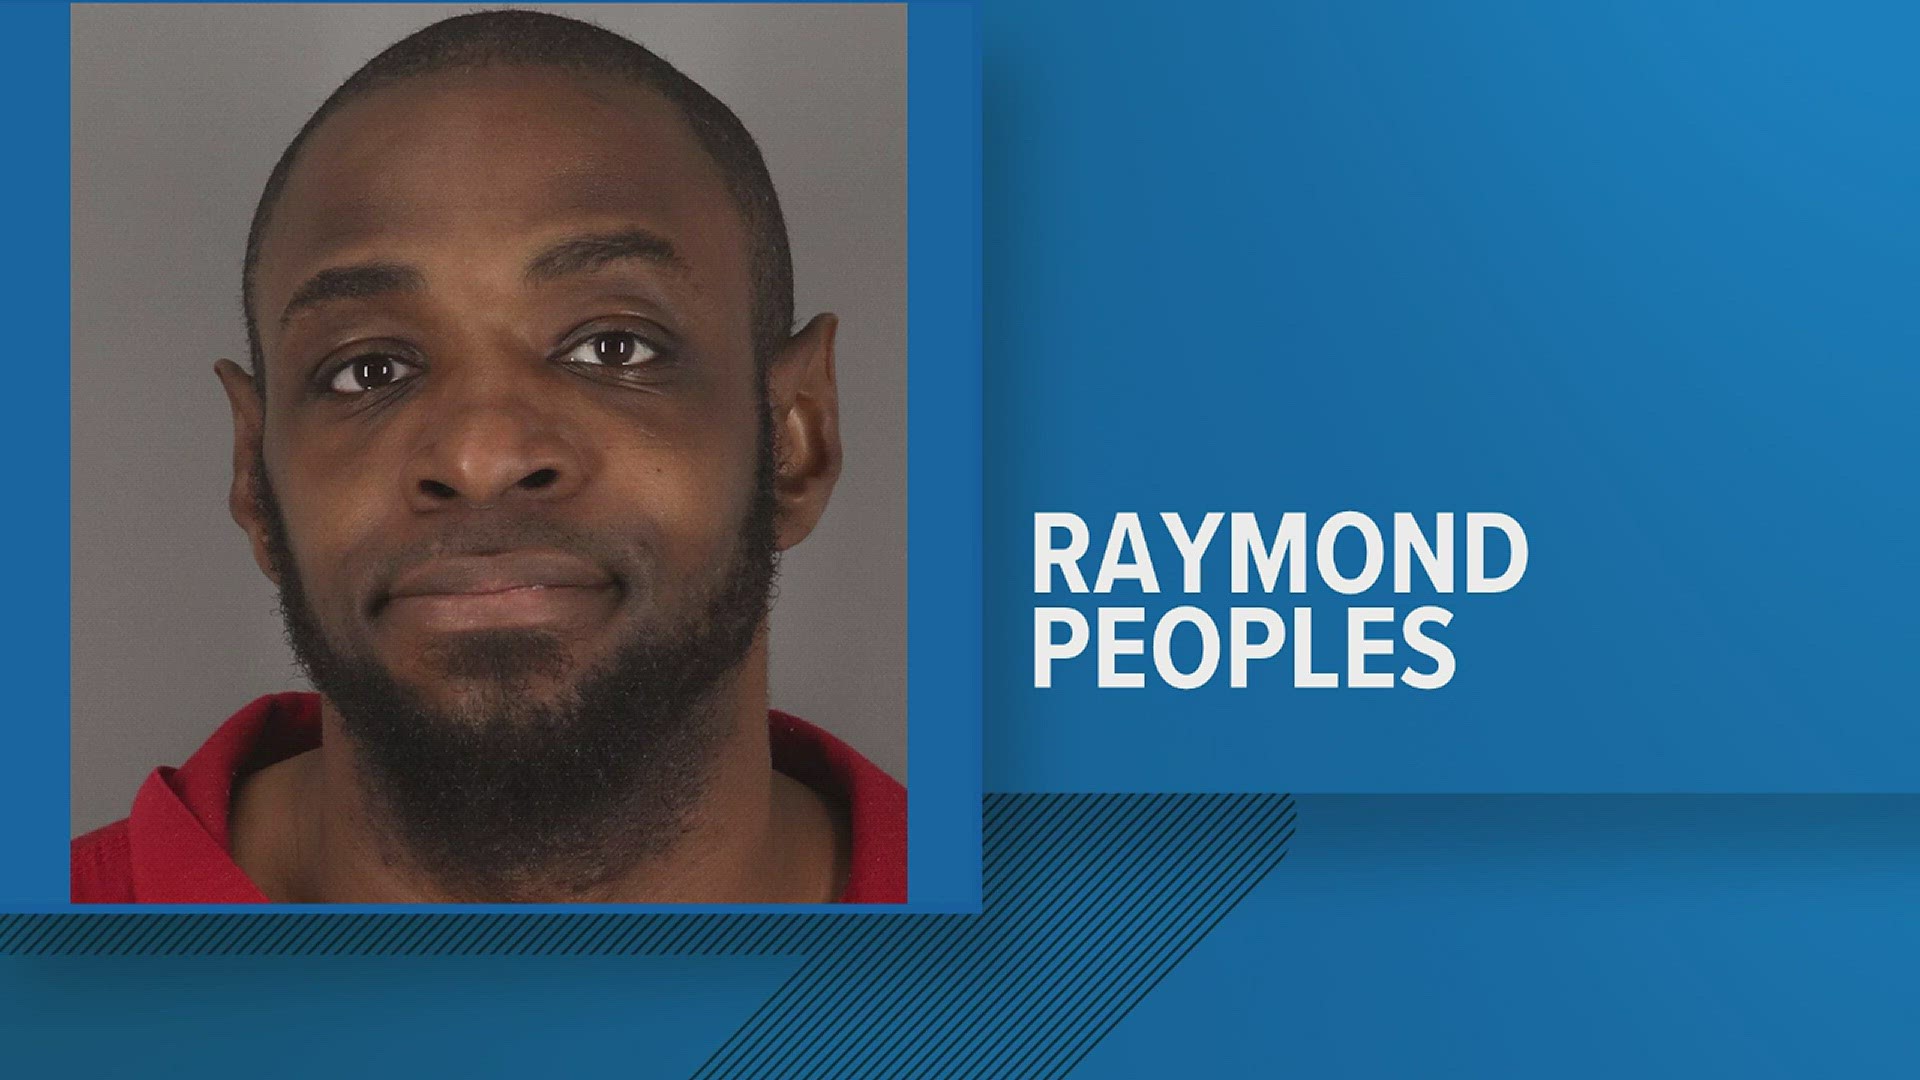 The defendant, Raymond Reginald Peoples, 35, of Beaumont represented himself in the trial. The jury could not come to a unanimous decision, resulting in a hung jury.